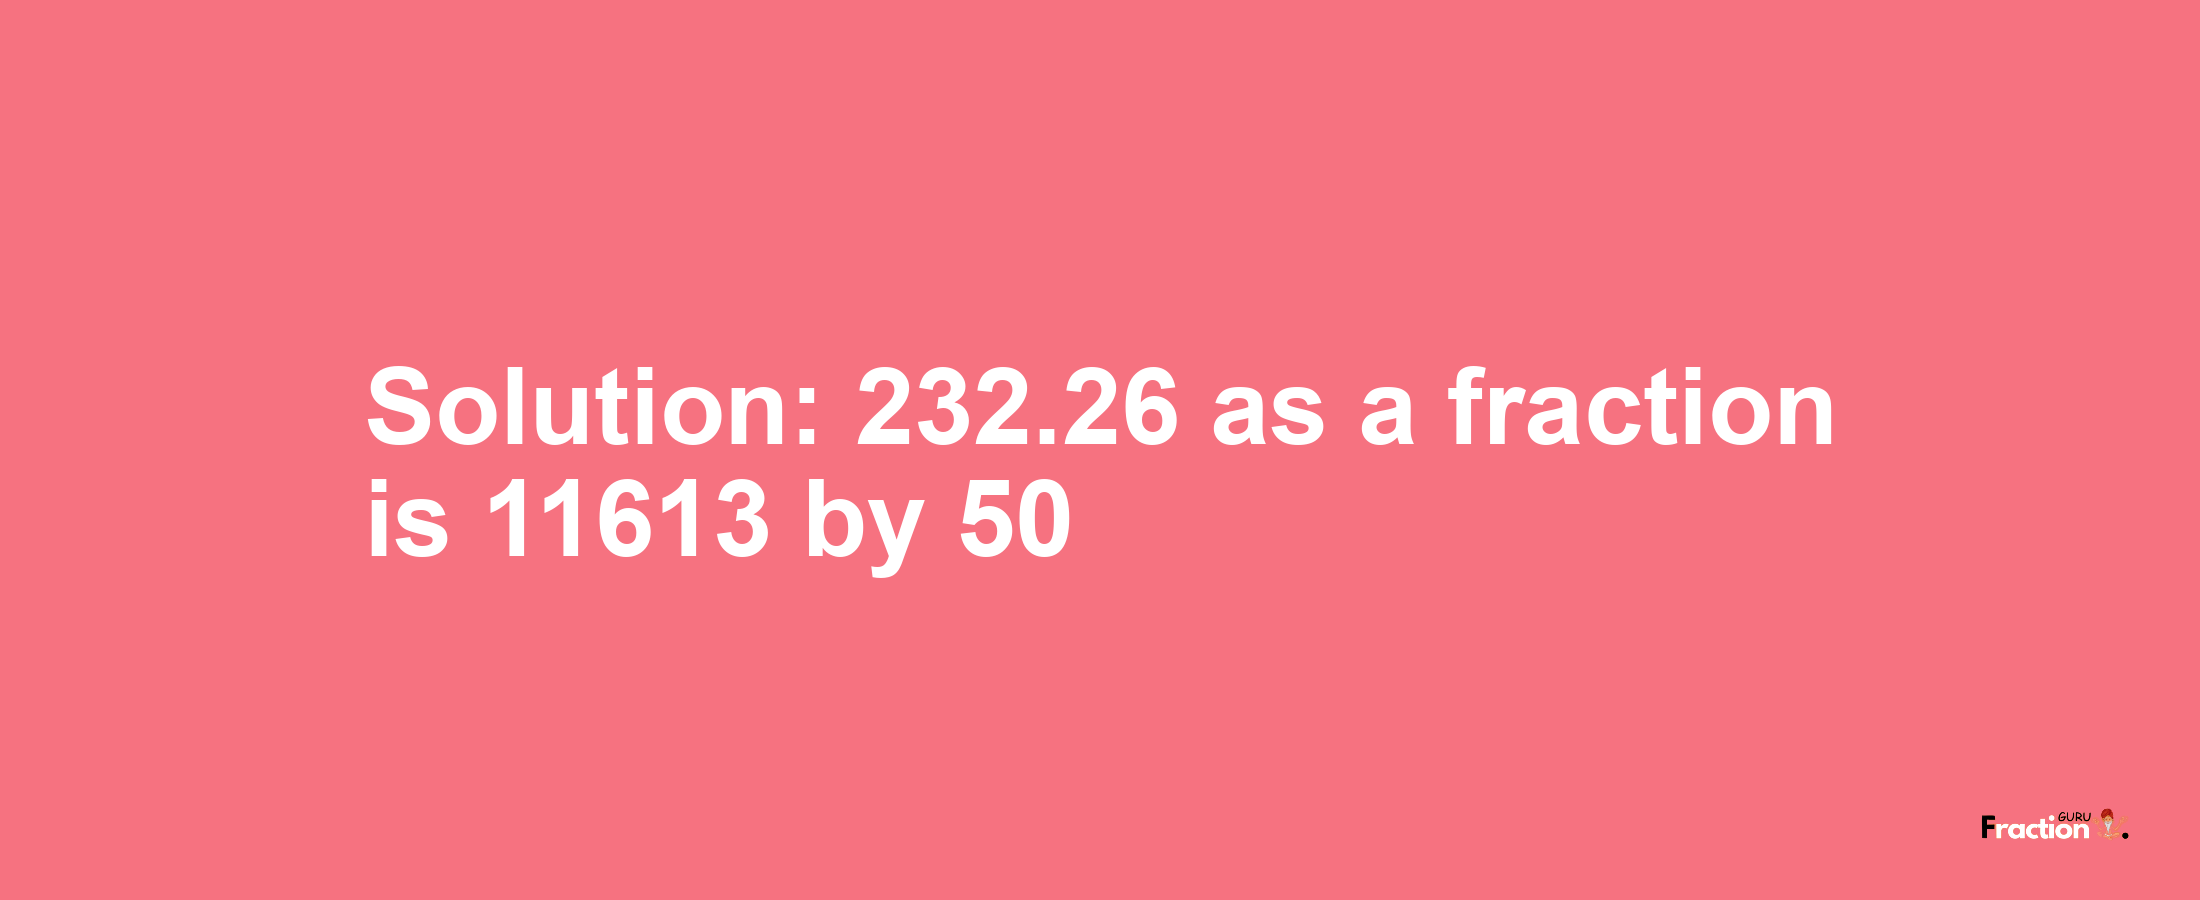 Solution:232.26 as a fraction is 11613/50